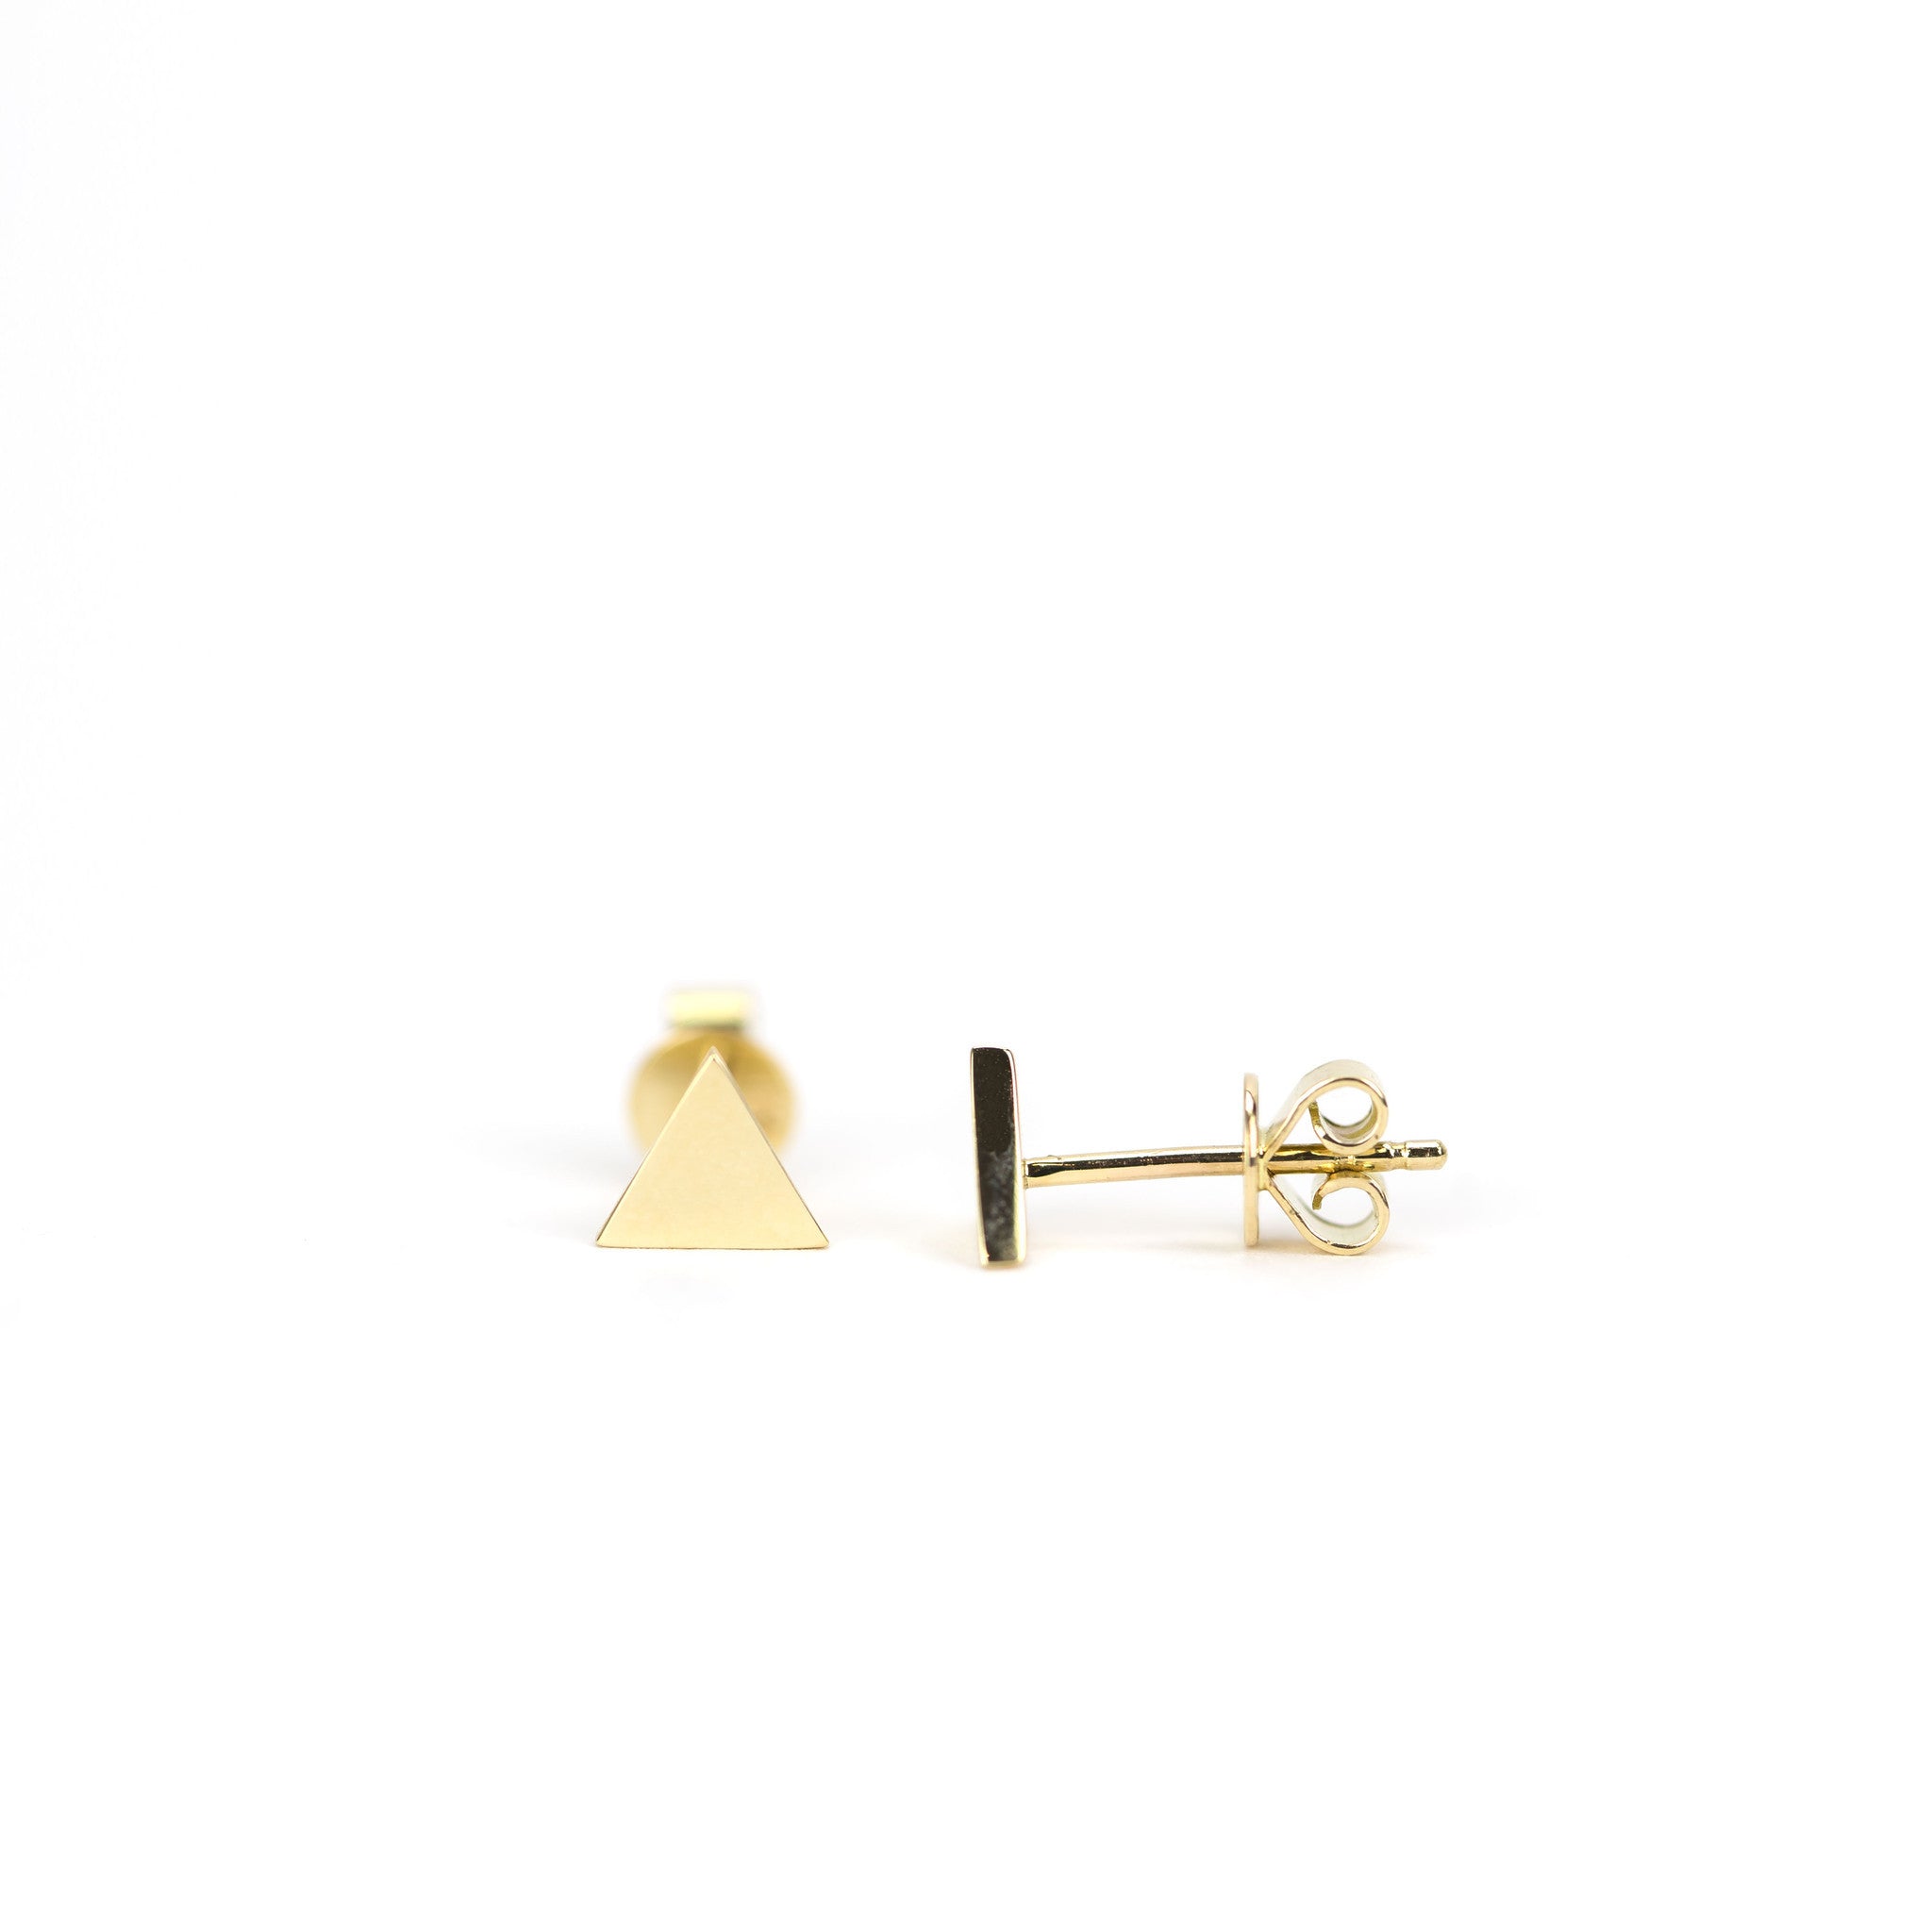 Golden Triangle Earrings by Atheria Jewelry